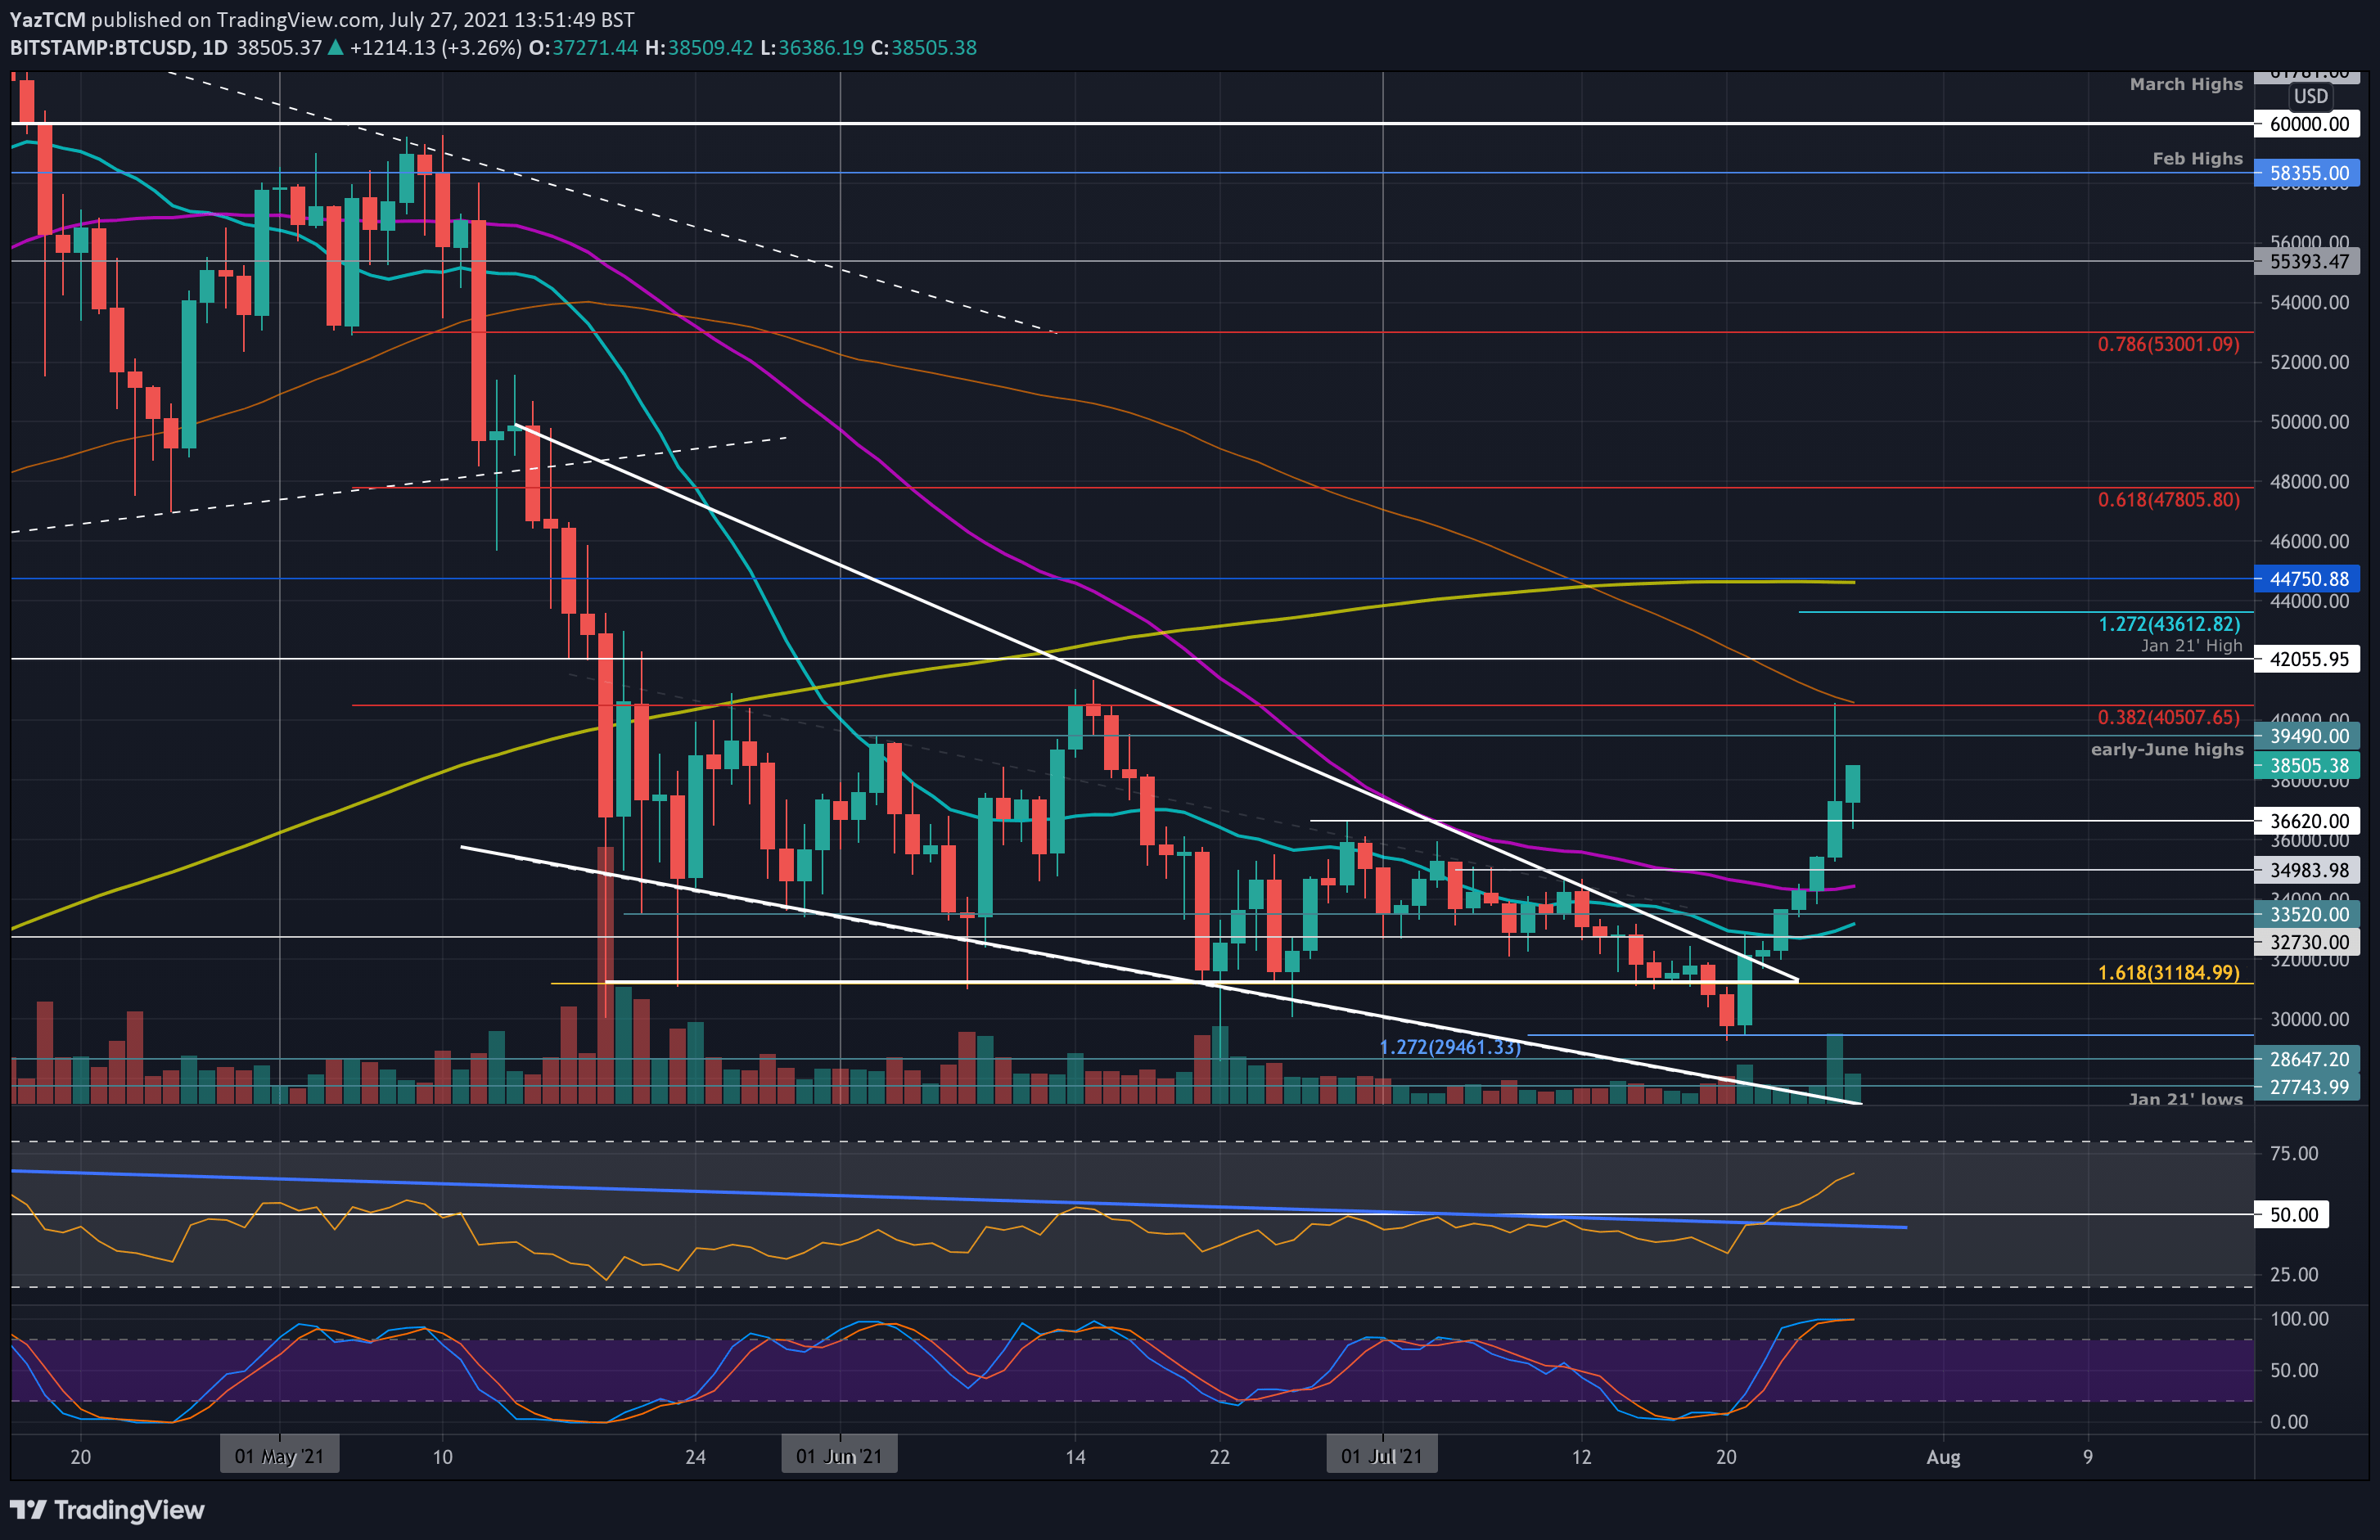 Bitcoin Facing Critical 2-Month Resistance, Will The Uptrend Continue? (BTC Price Analysis)